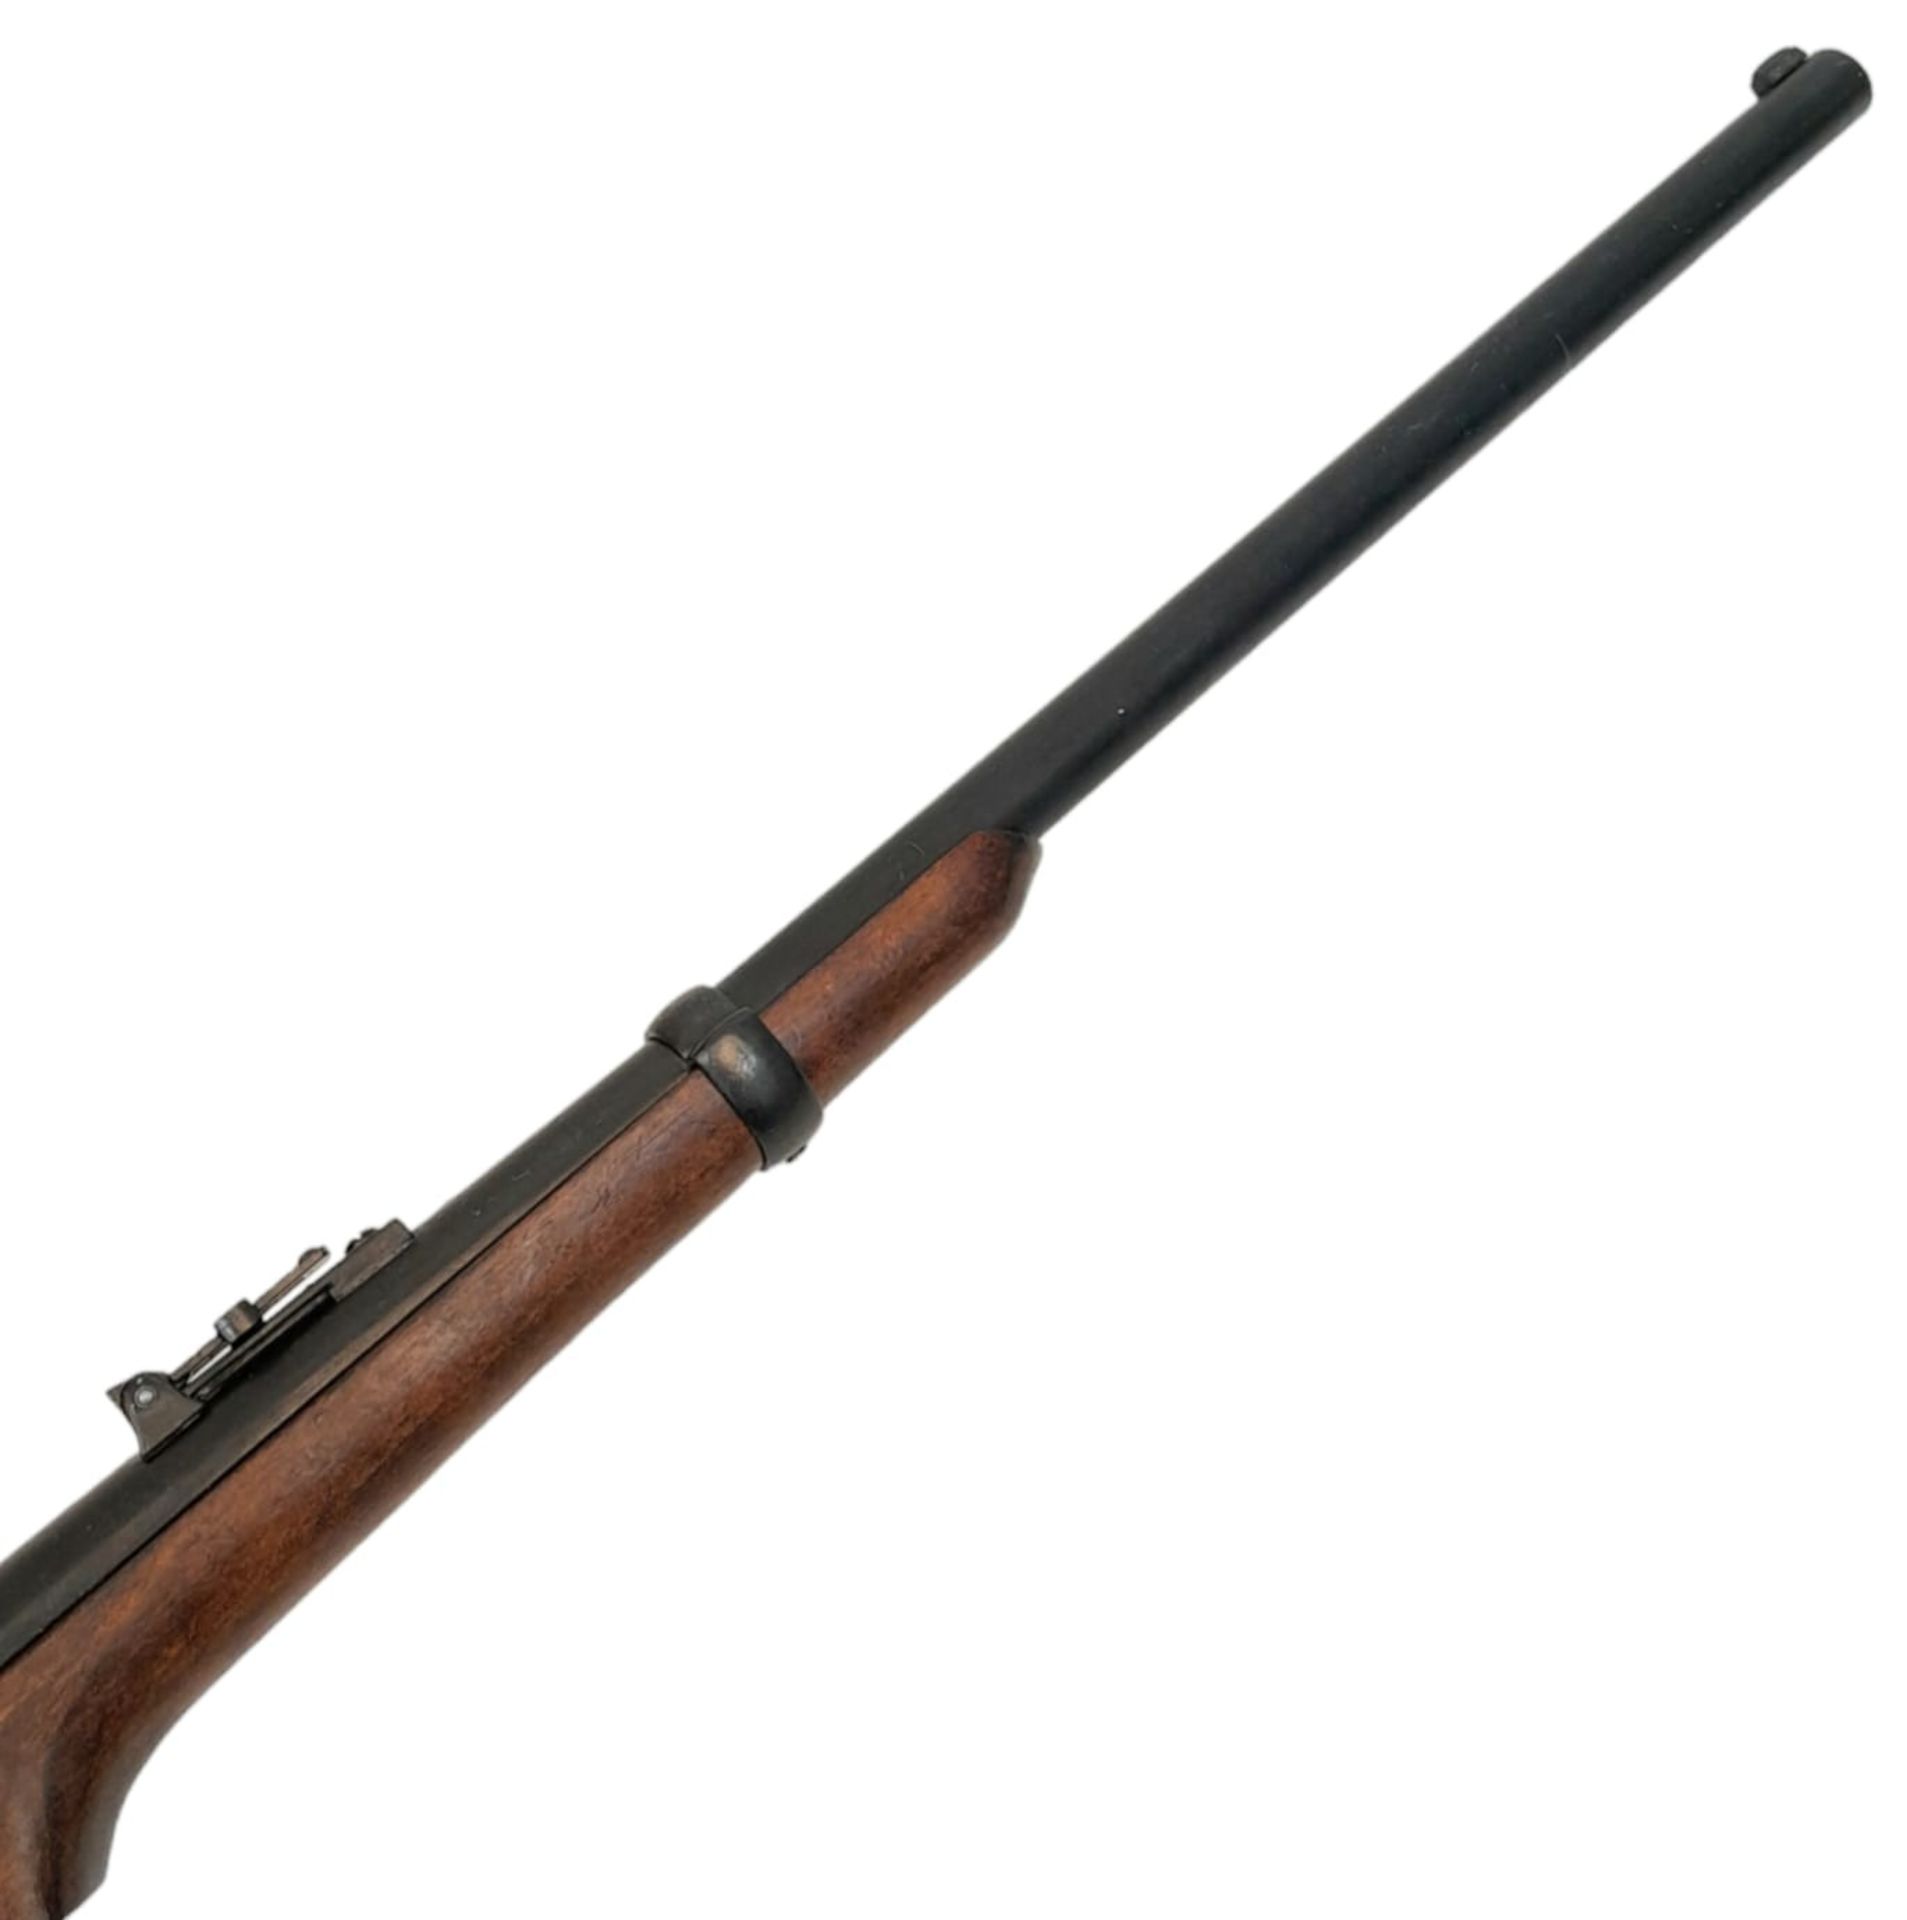 A Vintage, Full Weight and Size, Retrospective Inert Replica of an 1859 Carbine Rifle. Wood and - Image 3 of 11